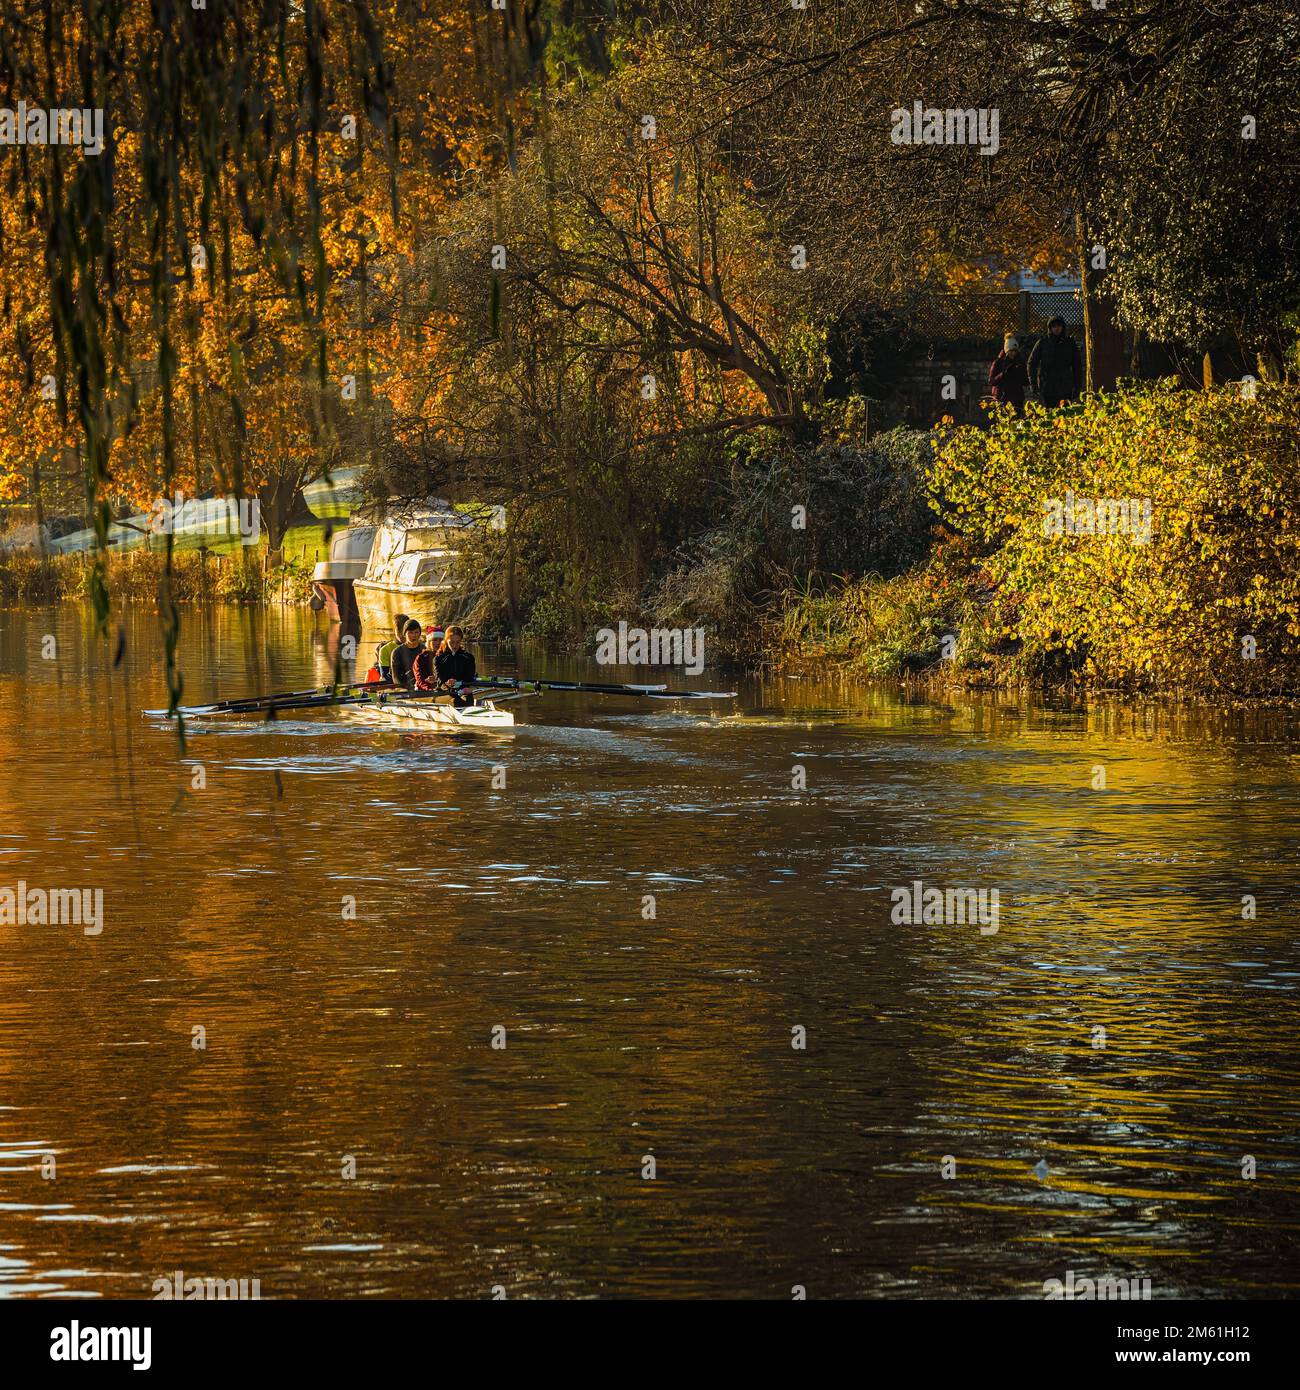 Rowers in a racing shell on the river Avon, with colourful autumn foliage reflected in the water. Stock Photo